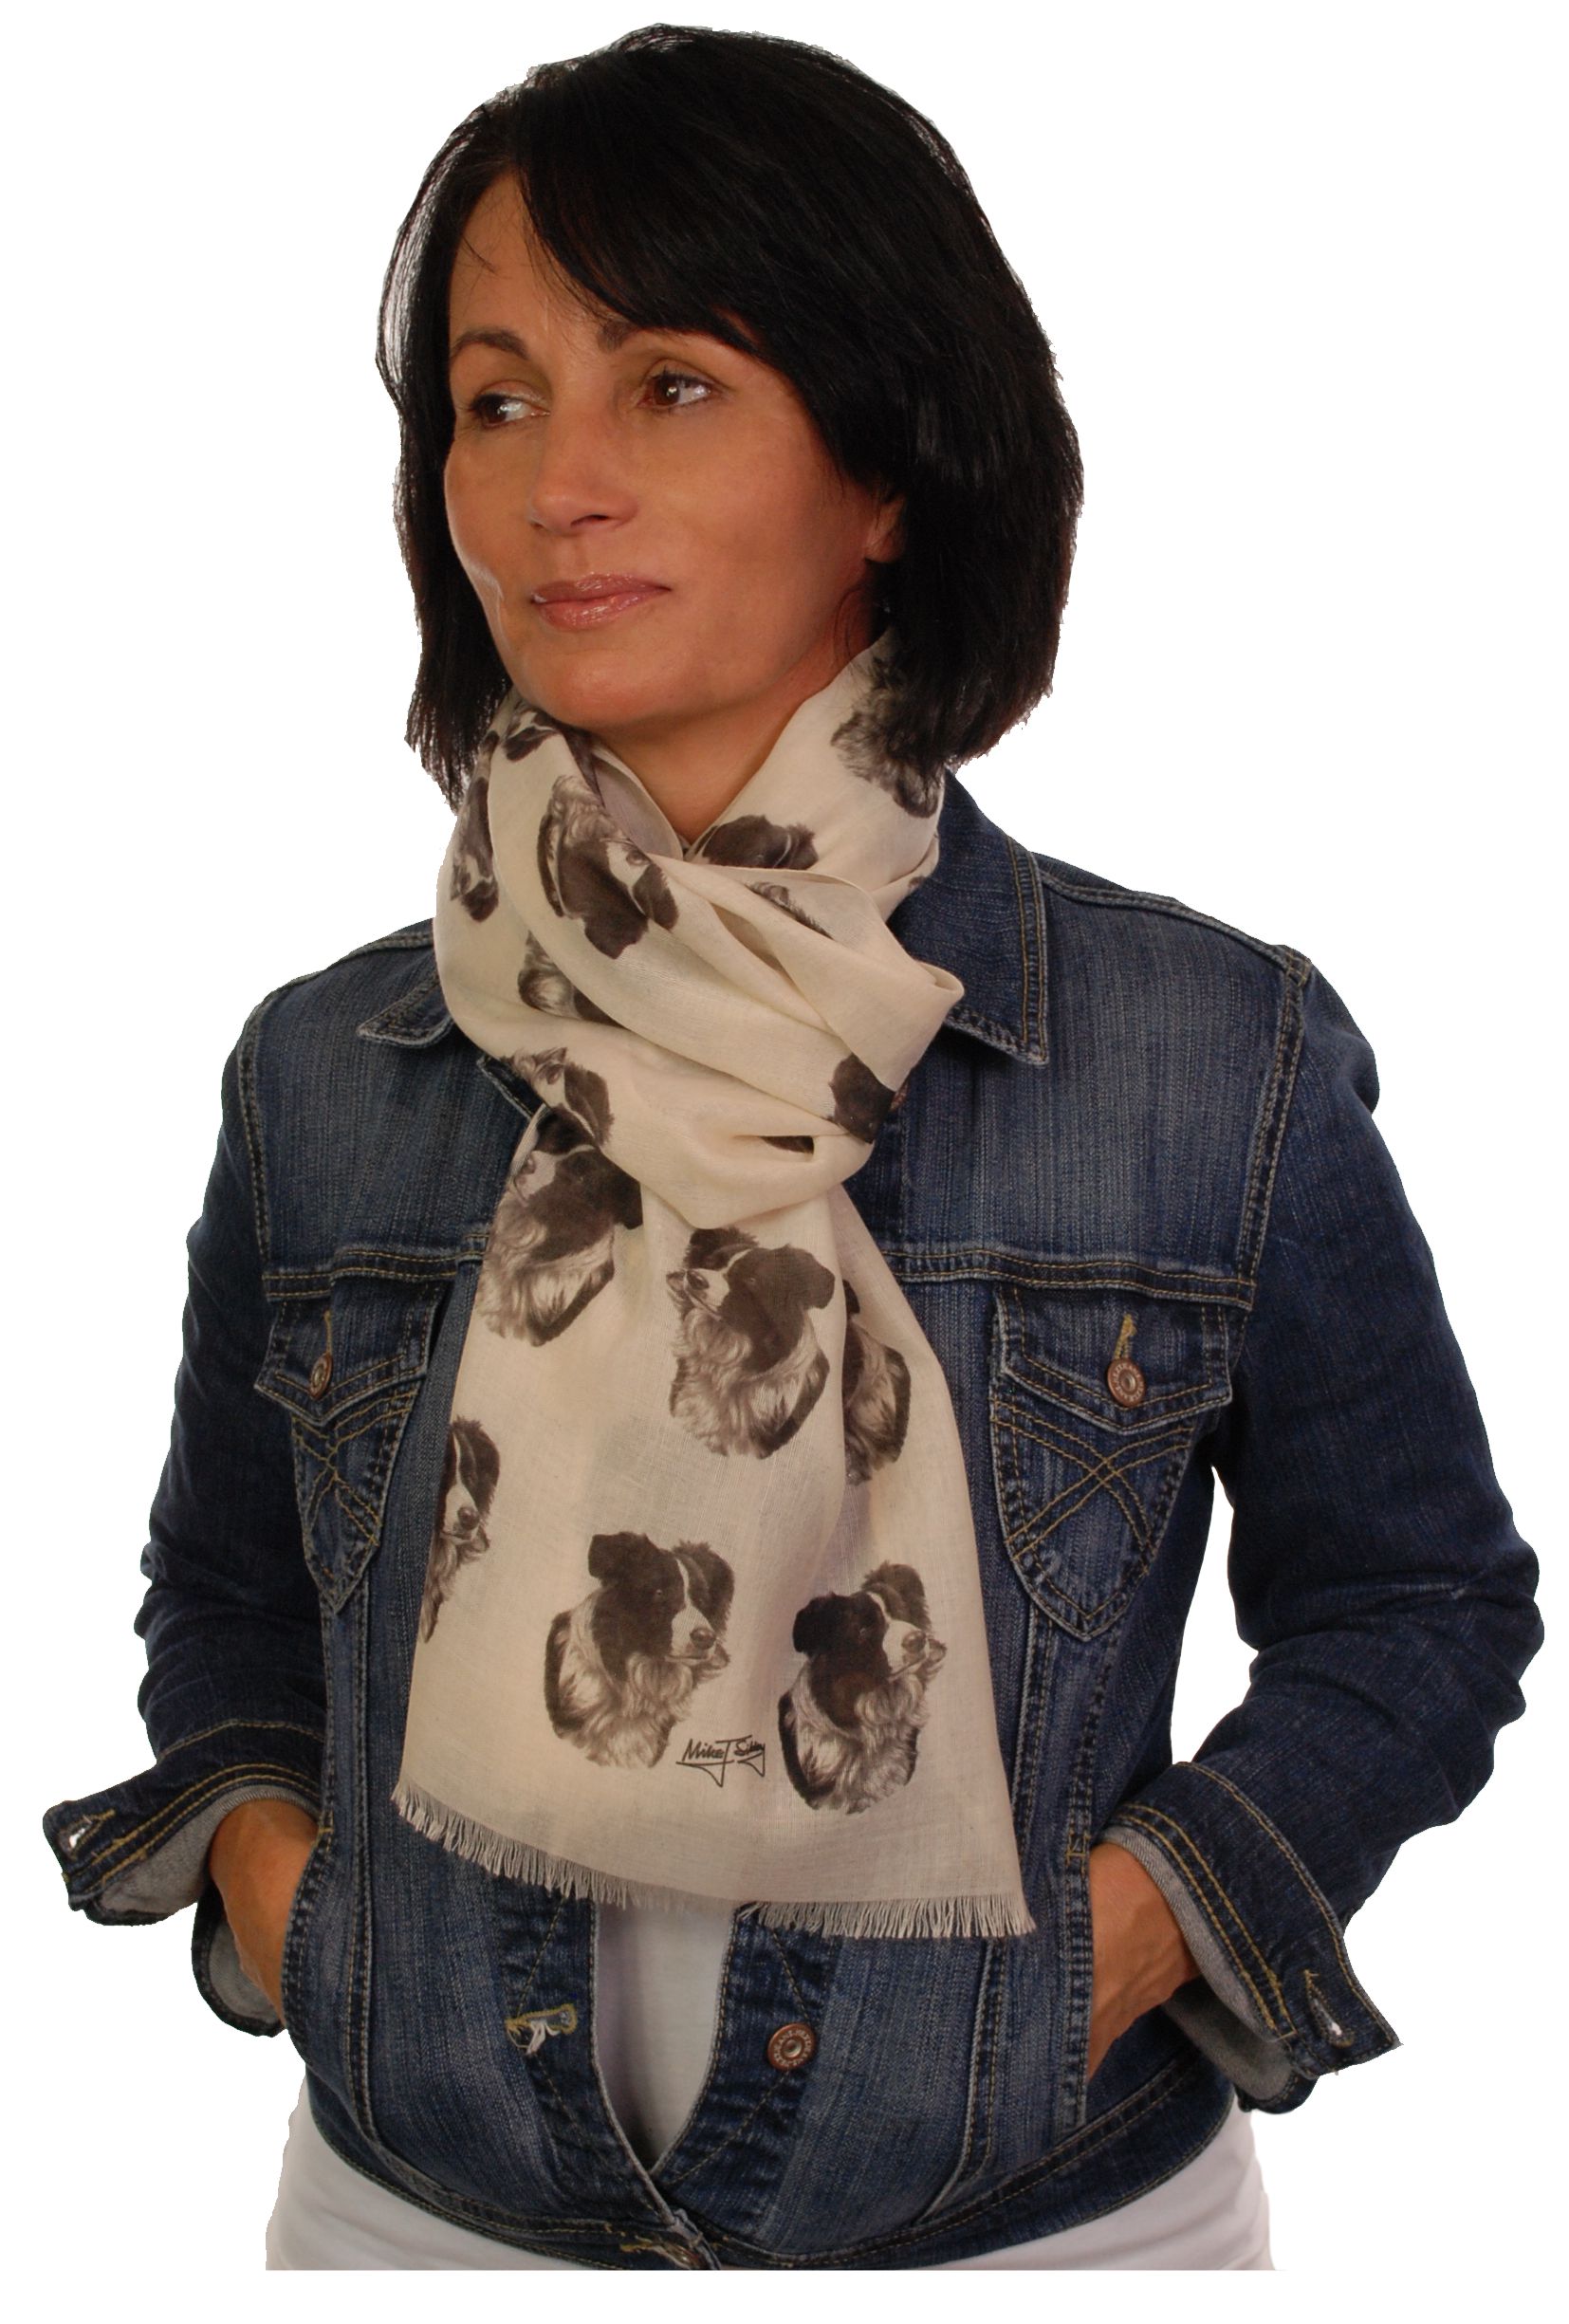 Mike Sibley Border Collie licensed design ladies fashion scarf